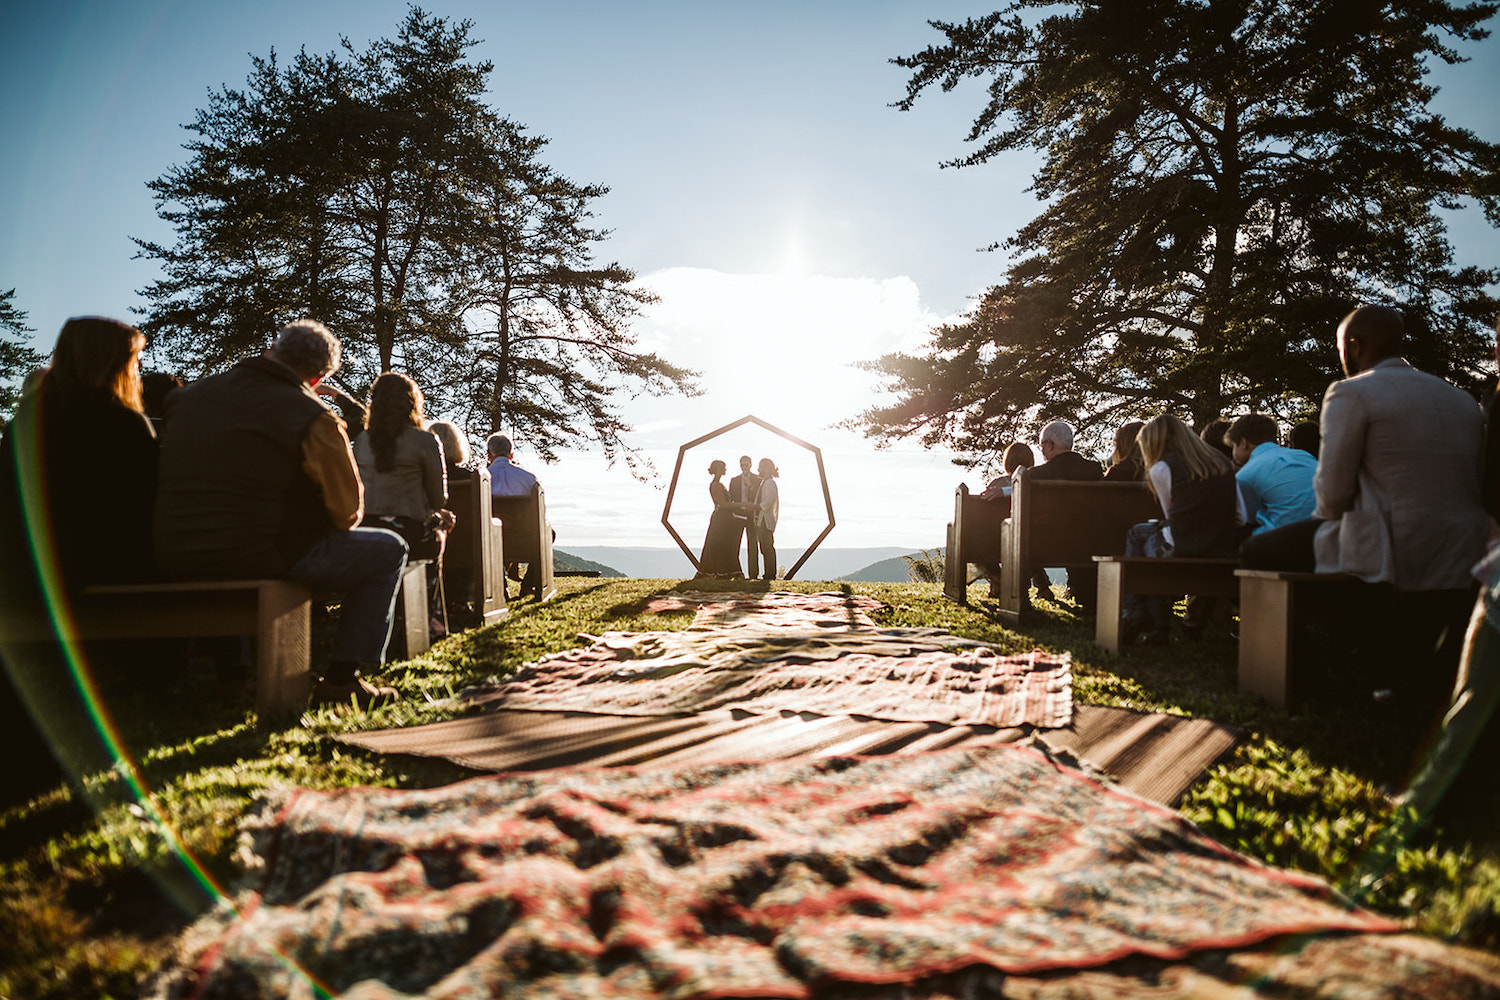 Oriental rugs line the aisle of bohemian Hemlock Falls wedding ceremony while man and woman exchange vows under heptagon arch